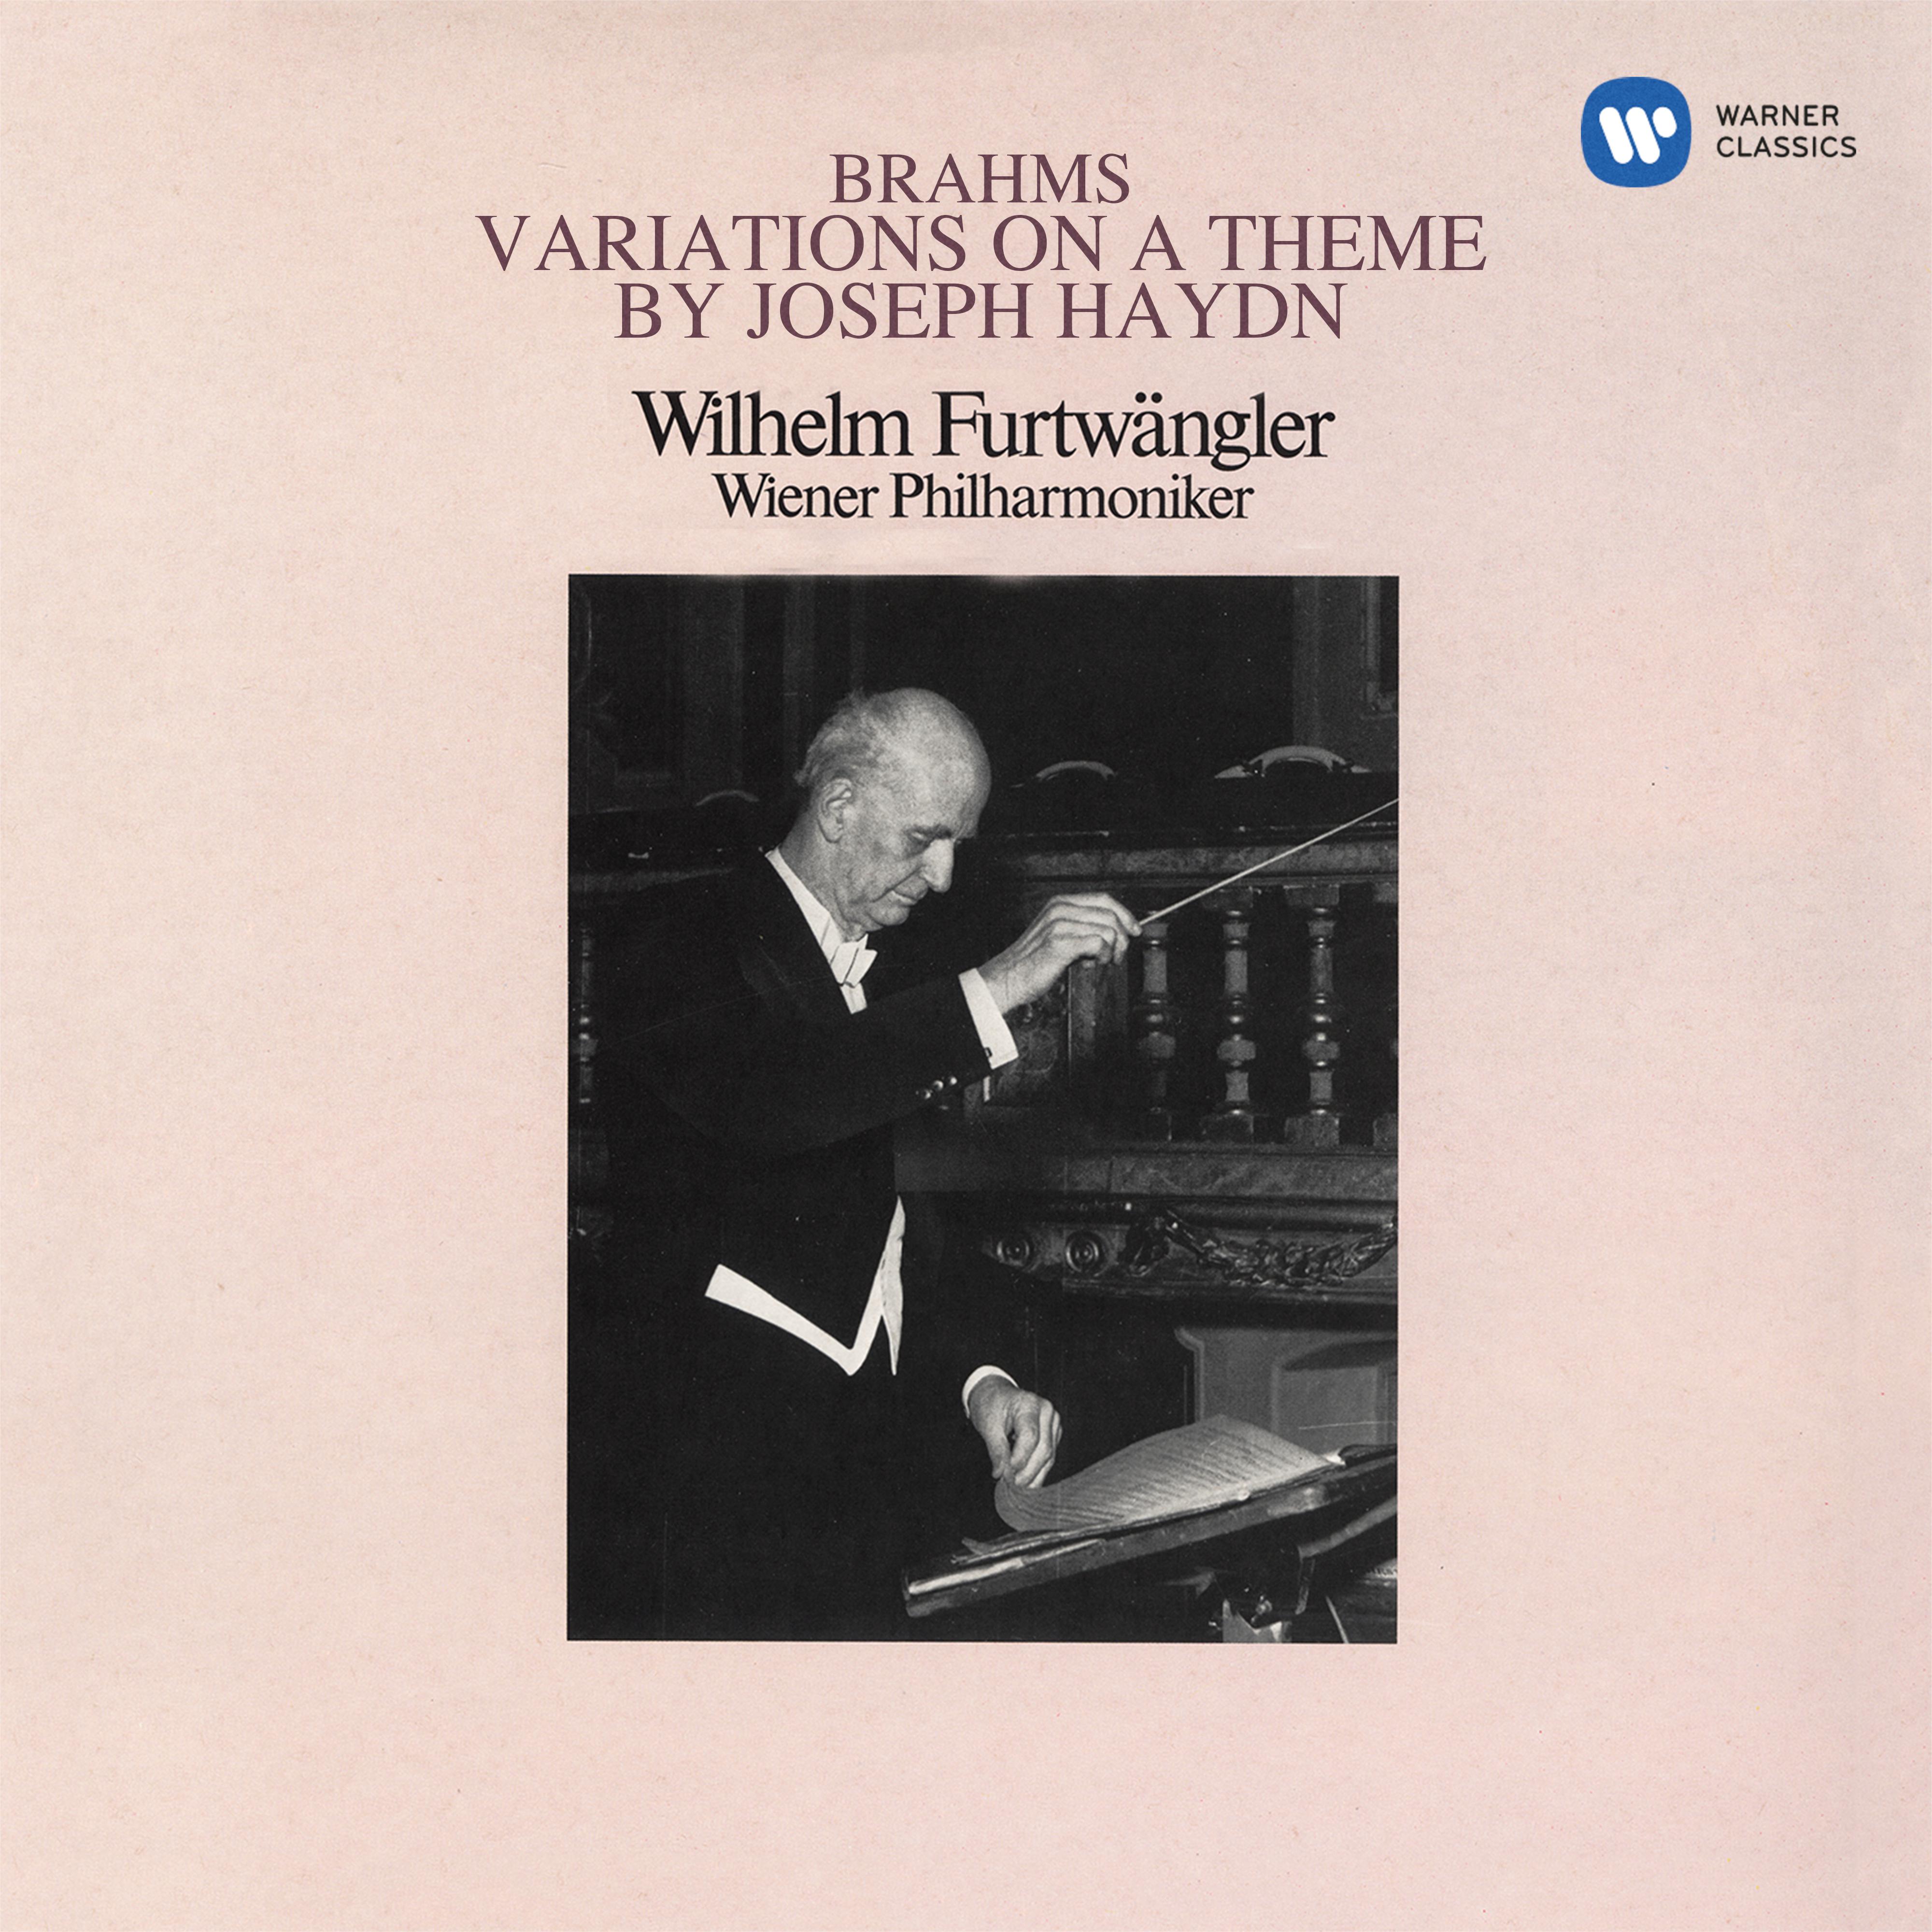 Variations on a Theme by Haydn, Op. 56a " St. Antoni Chorale": Variation II. Piu vivace